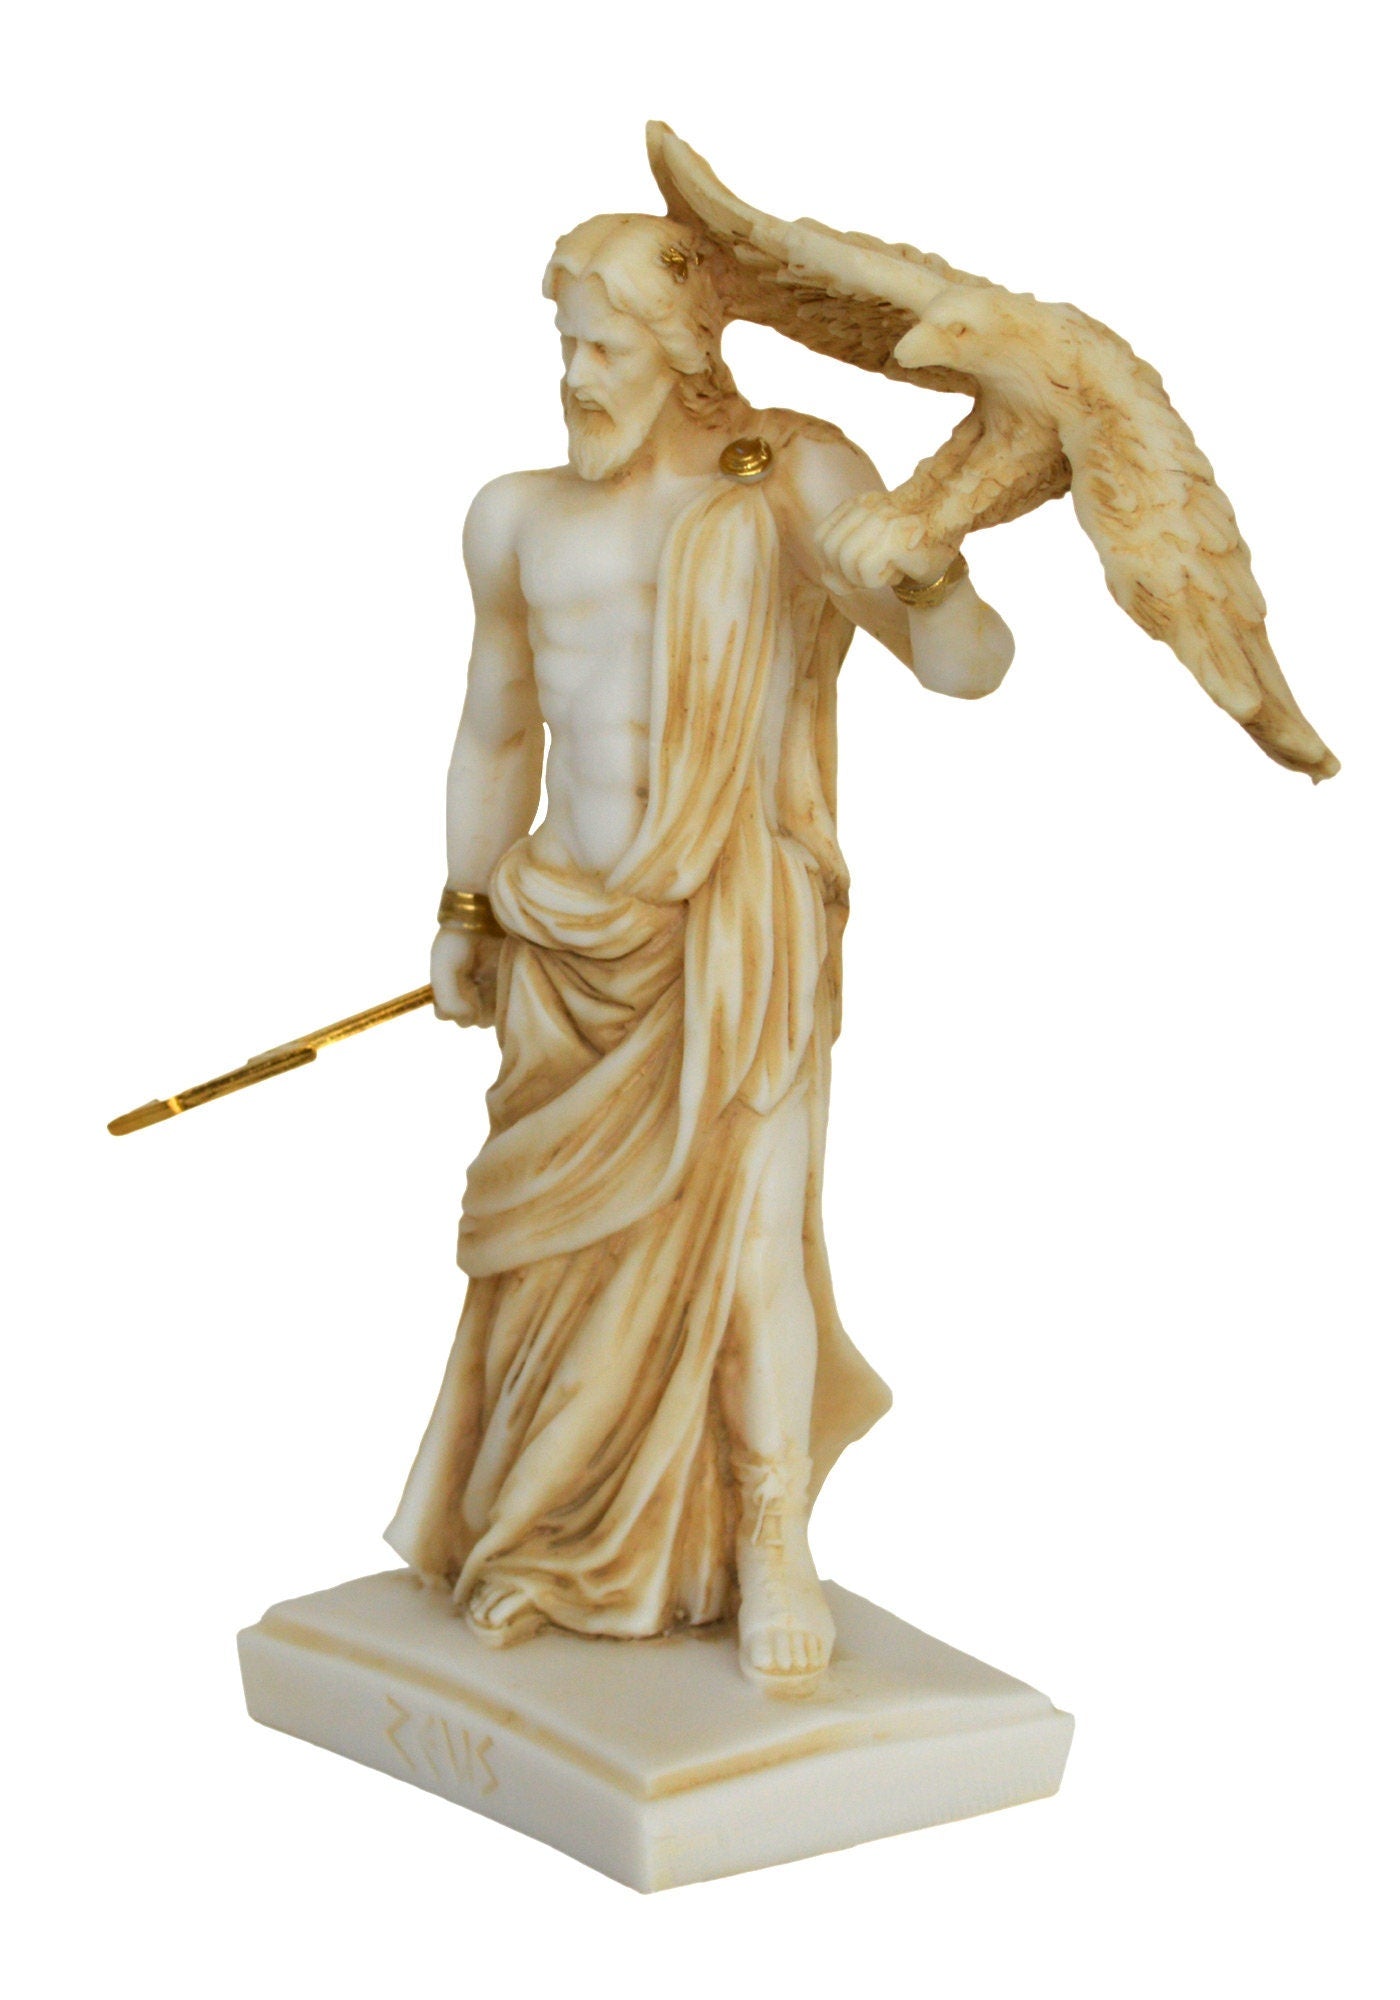 Zeus Jupiter- Greek Roman King of all Gods of Mount Olympus - Ruler of Sky, Lightning and Thunder - Heaven and Earth - Aged Alabaster Statue